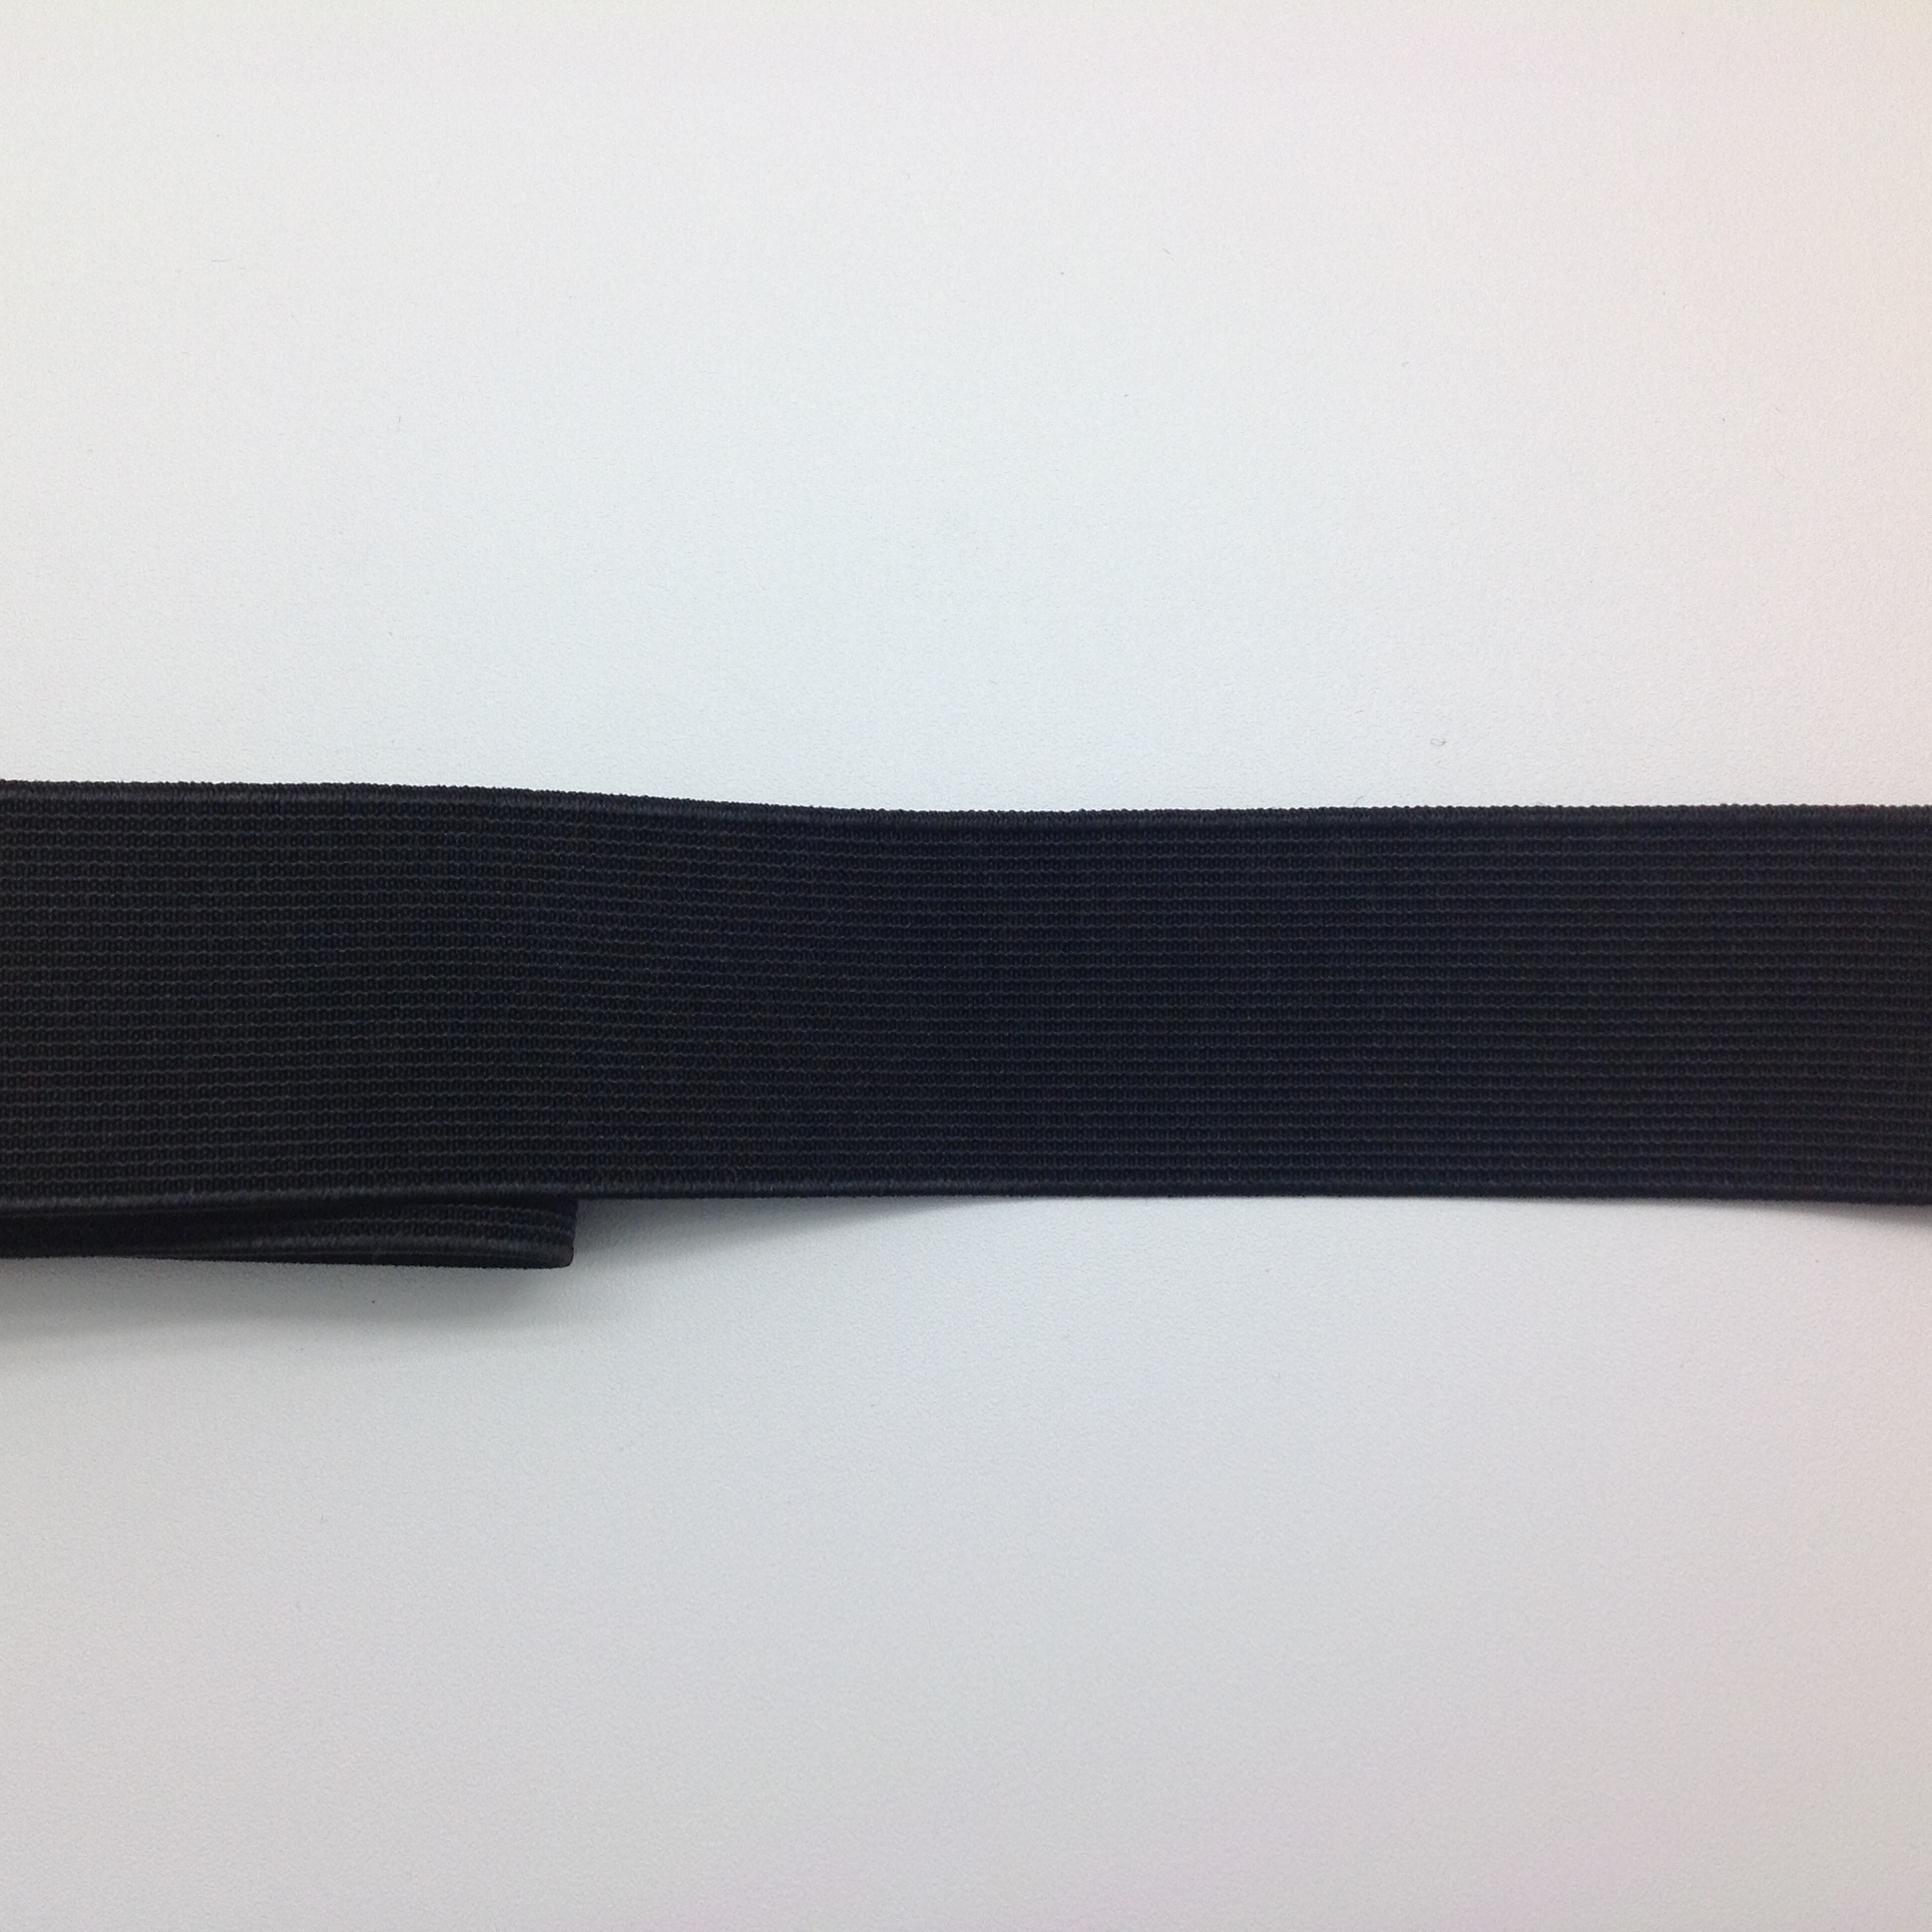 35mm Soft brushed elastic (black) sold in 5m lots just $1.20/m